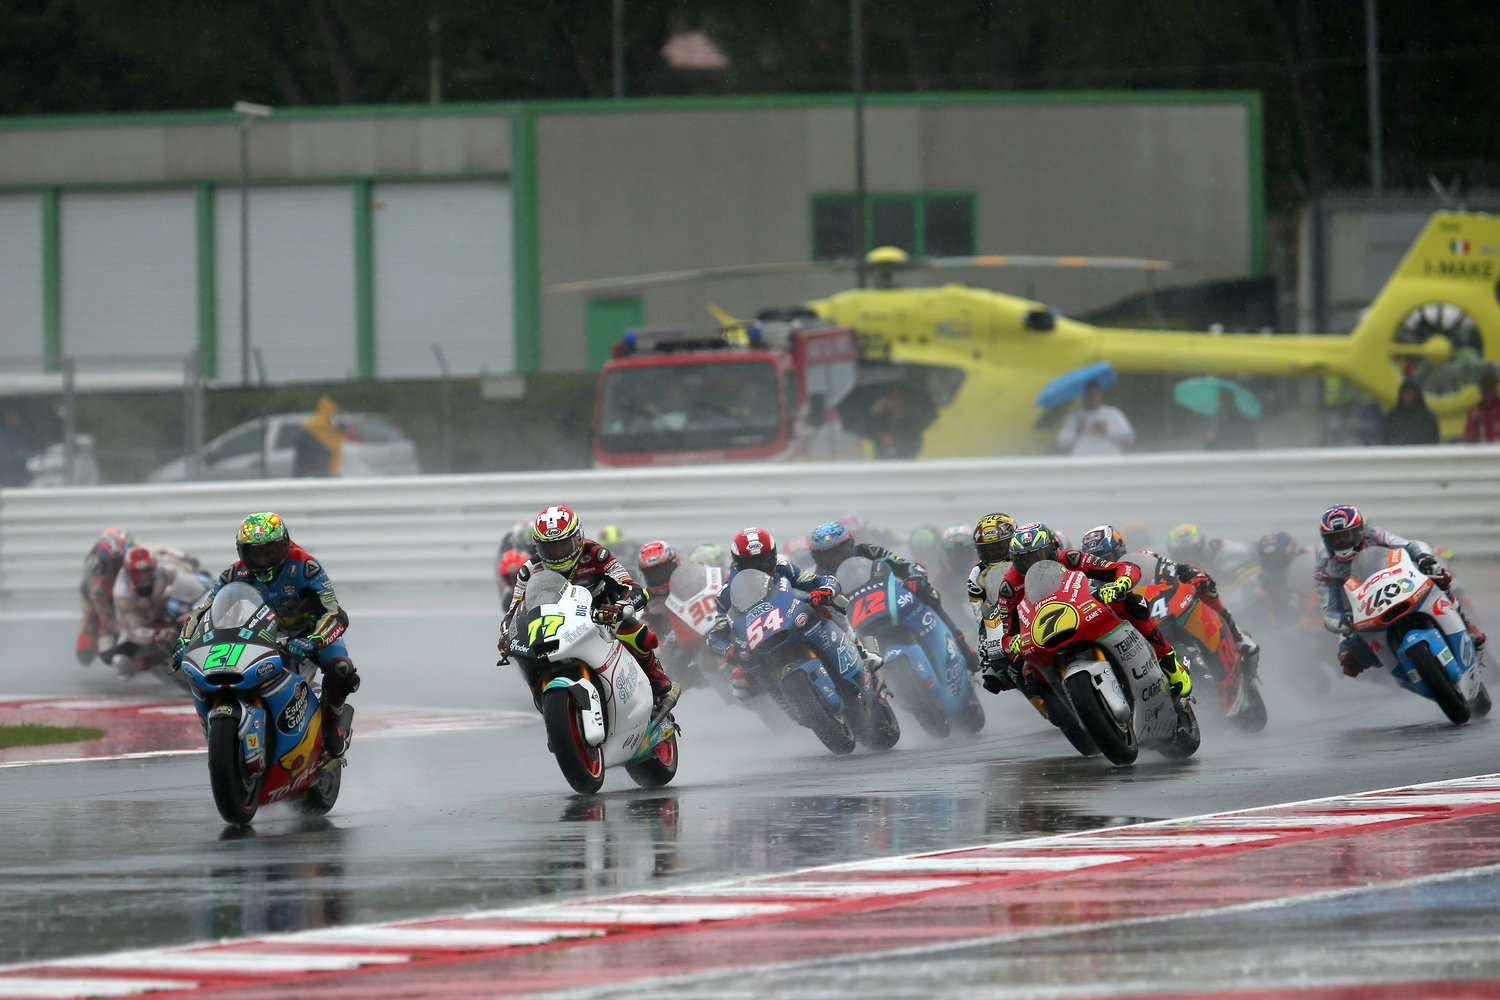 The Forward Racing Team leaves Misano without well-deserved laurels 